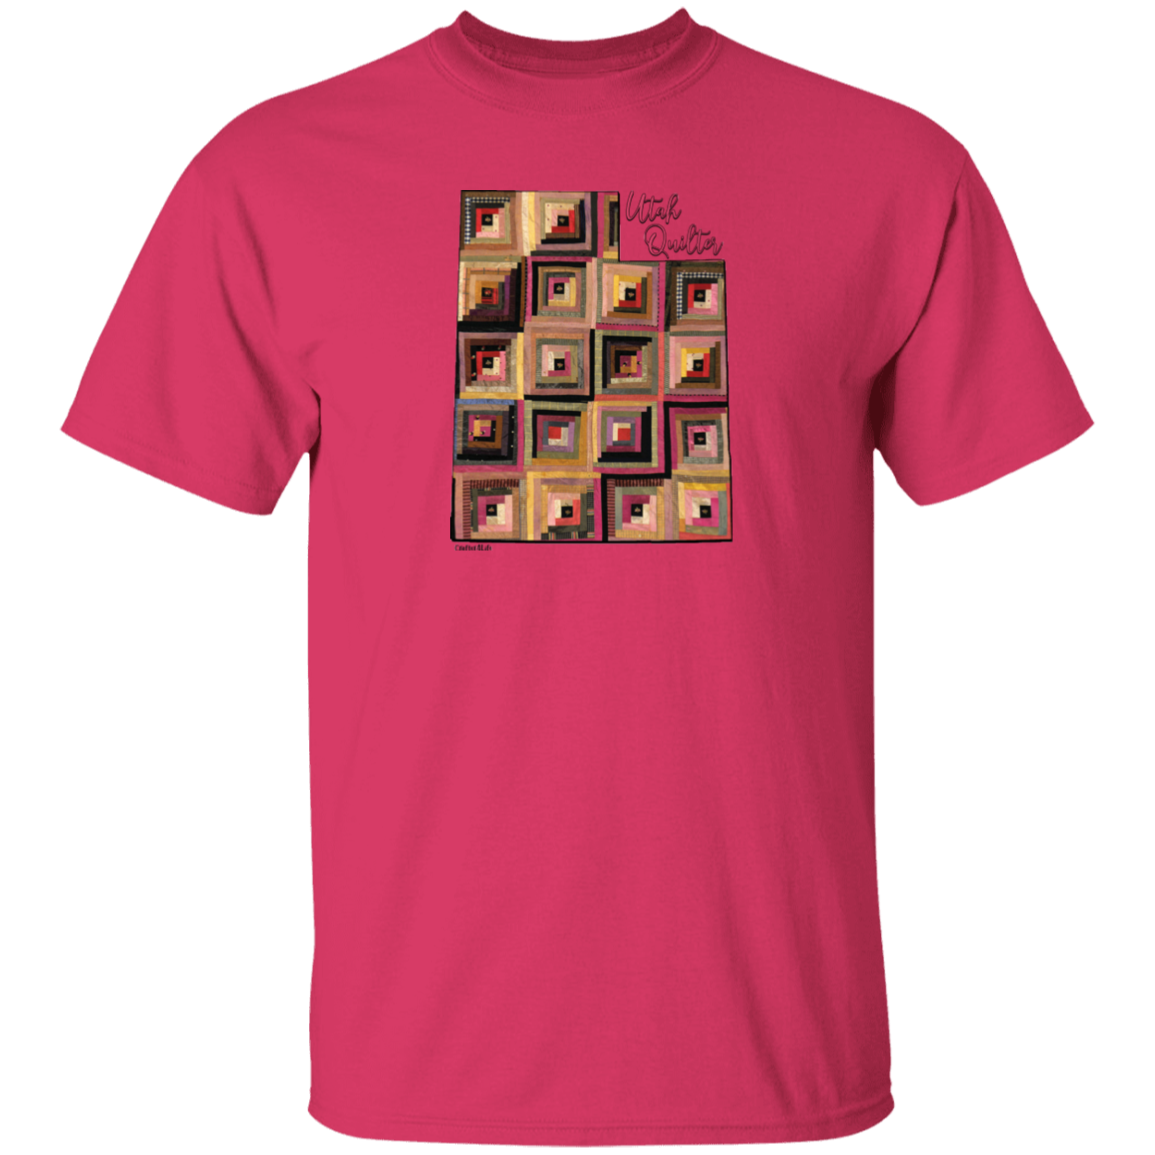 Utah Quilter T-Shirt, Gift for Quilting Friends and Family